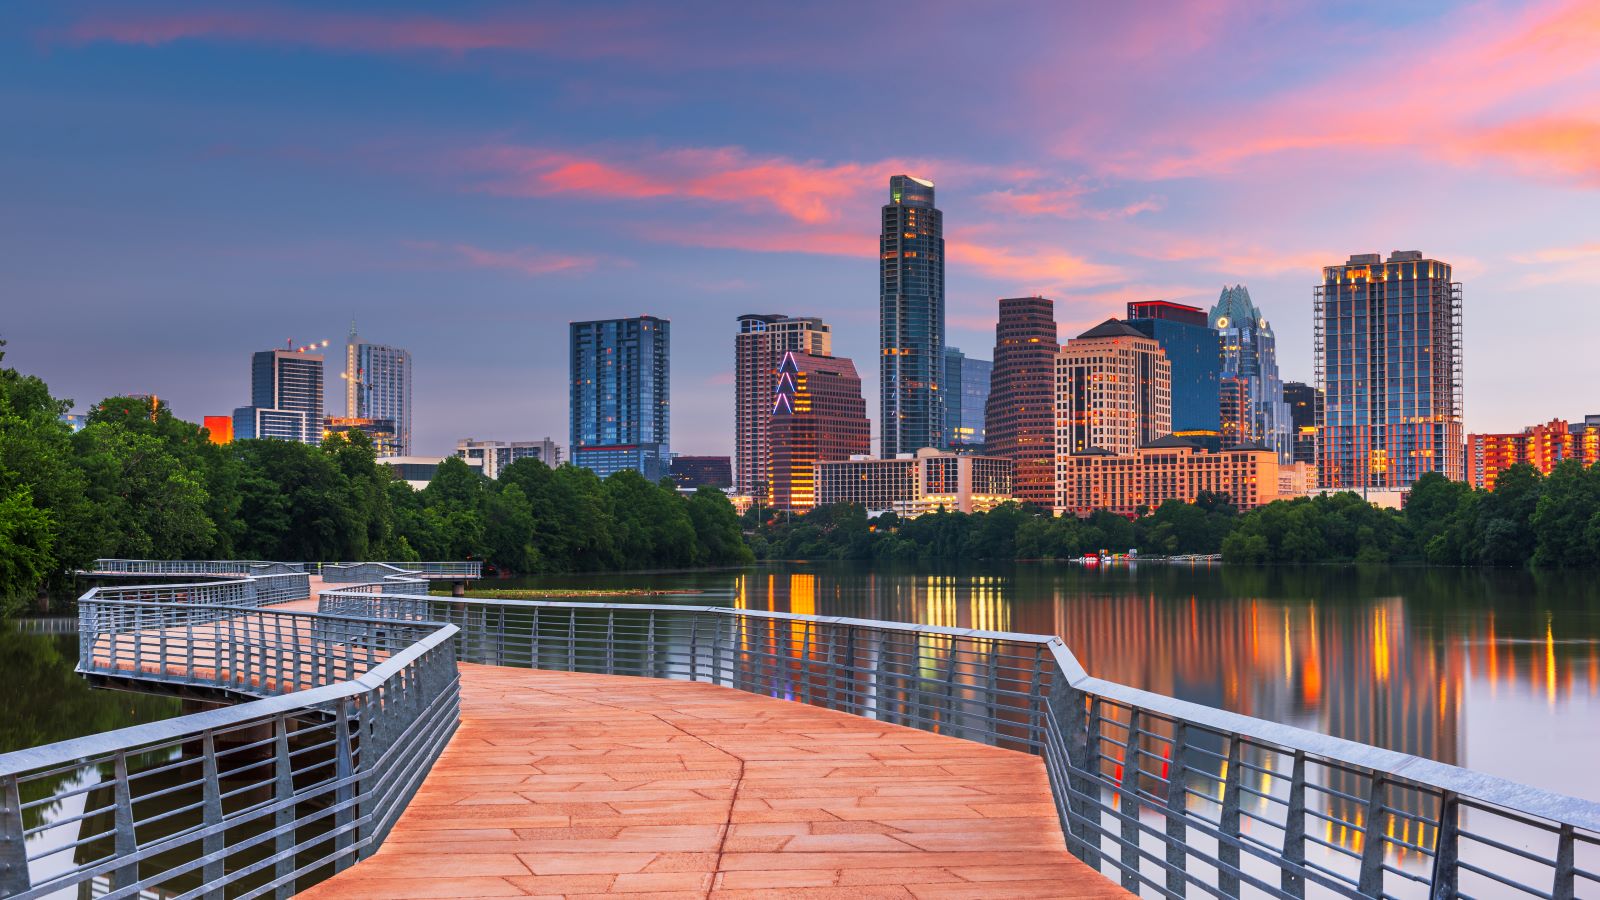 Image credit: Shutterstock / Sean Pavone <p>Known for its live music scene and outdoor activities, Austin is budget-friendly. Plan for around $70 a day to enjoy food, music, and fun.</p>